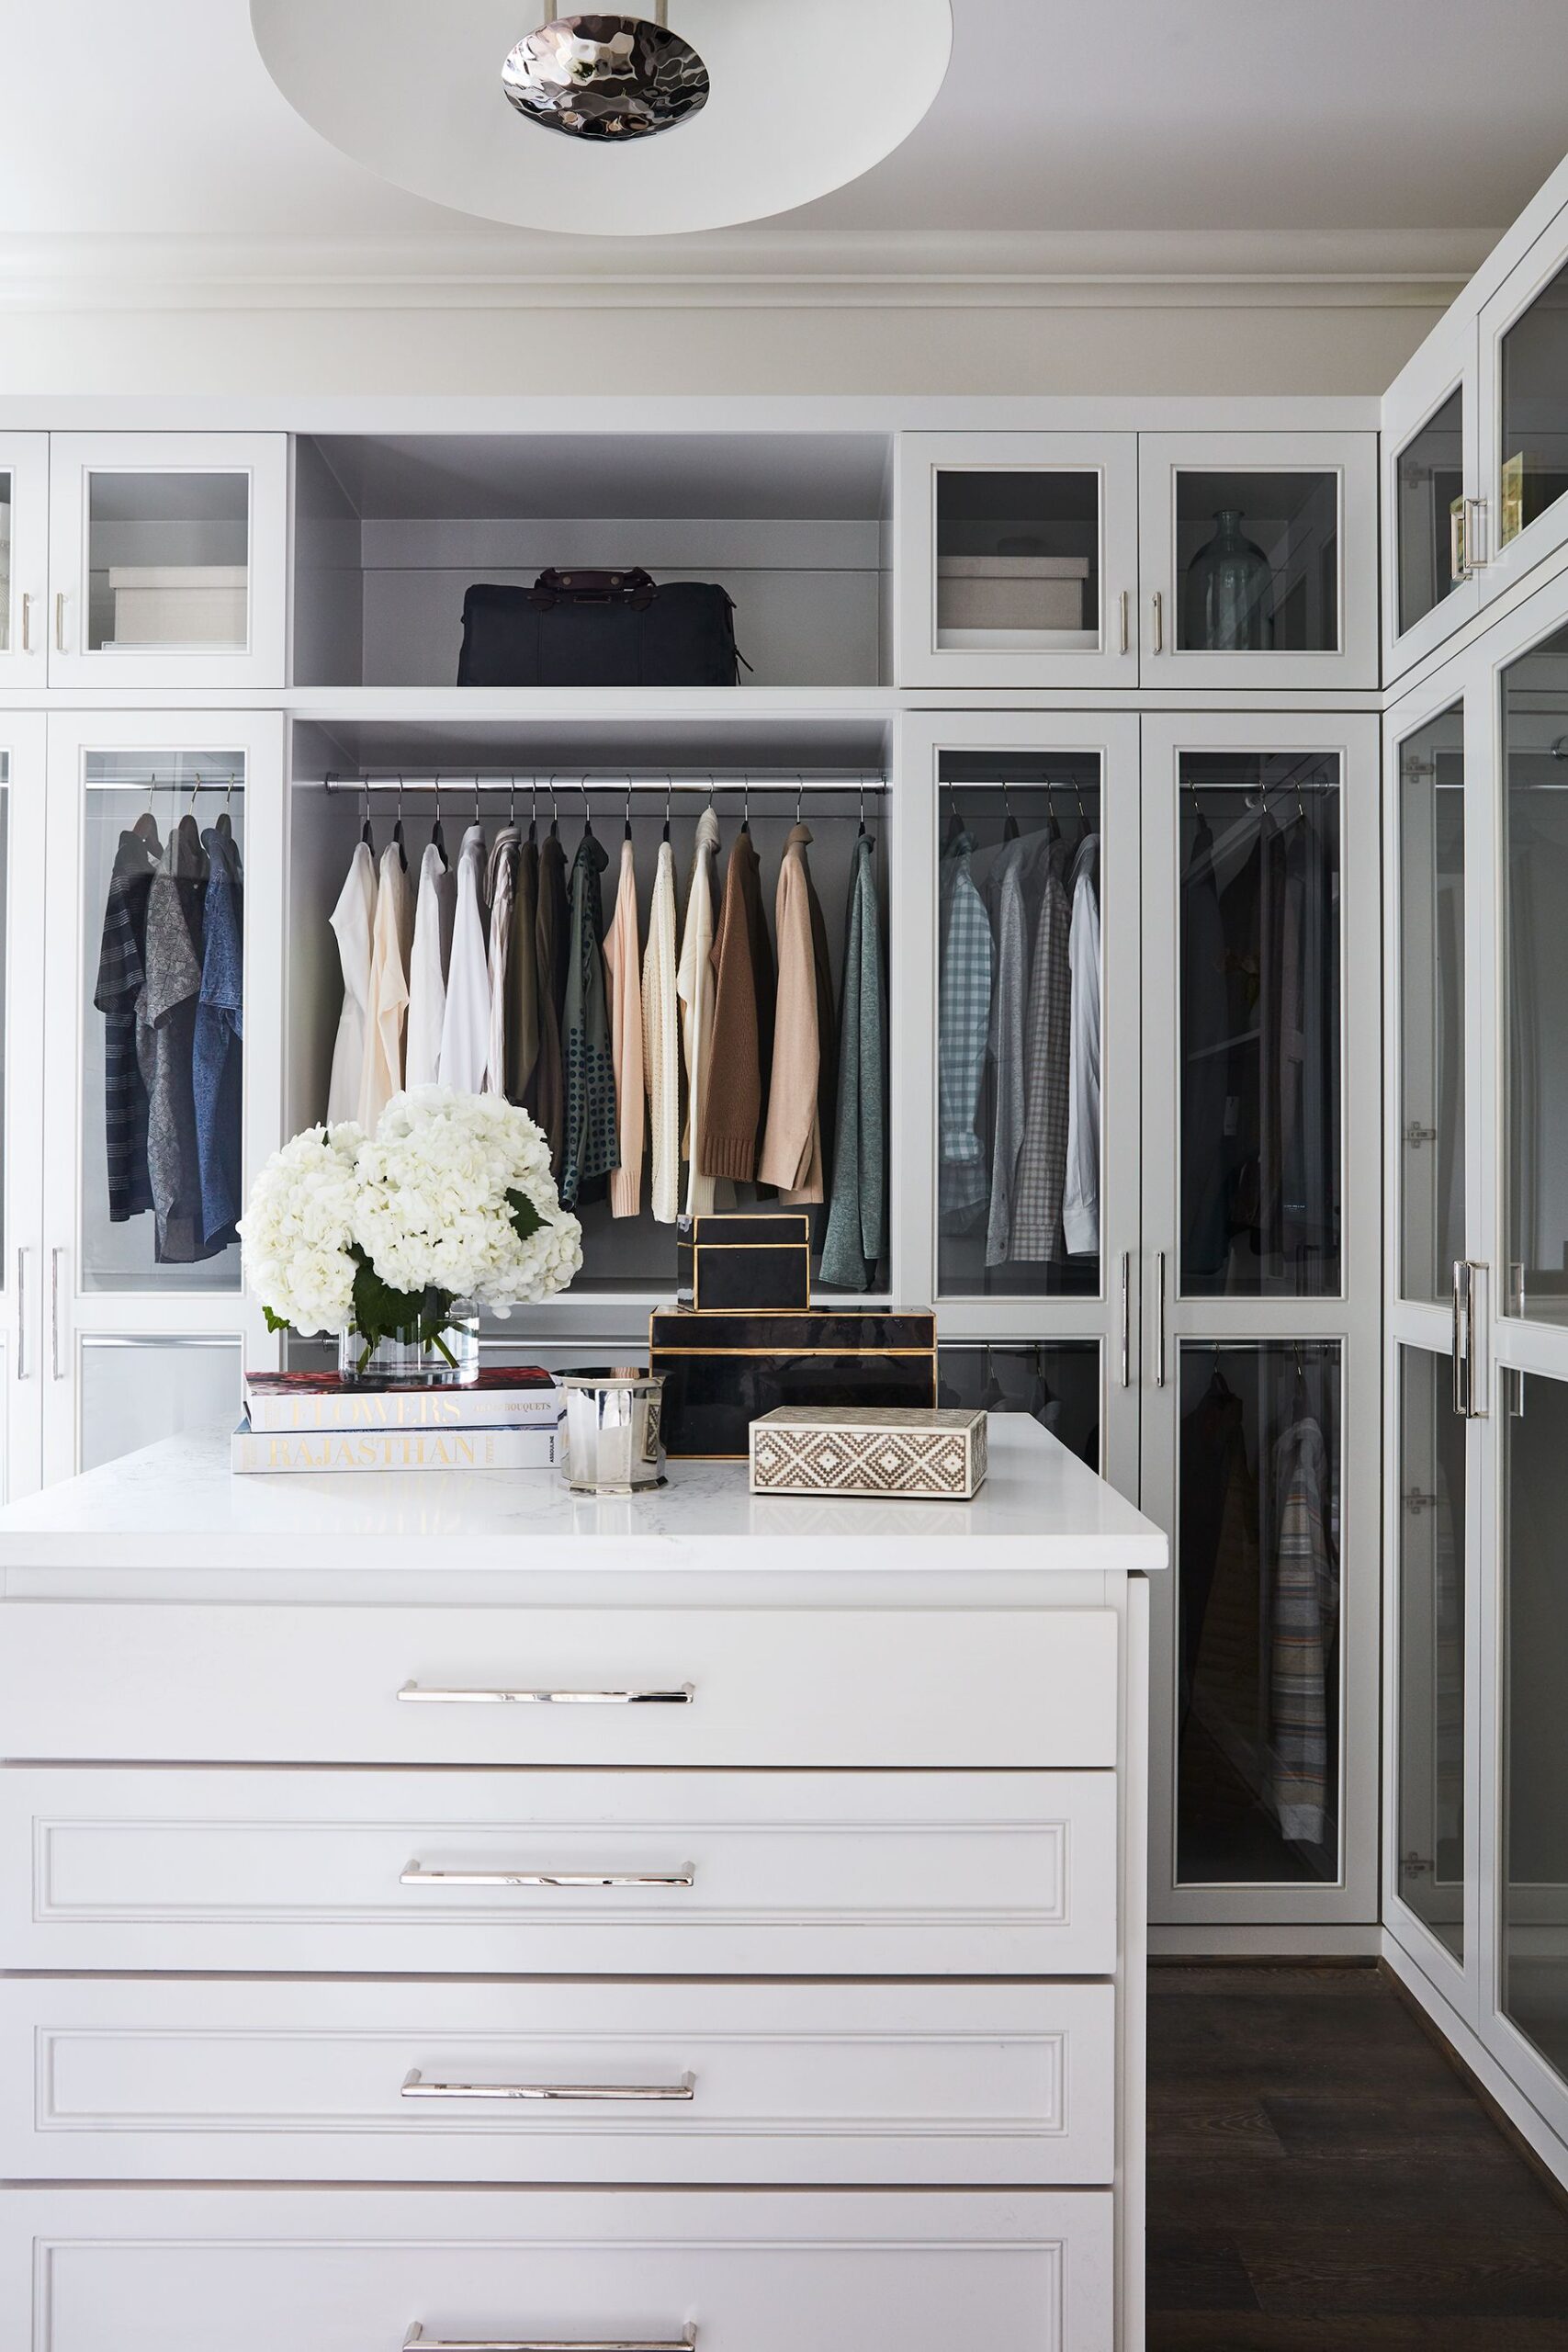 You are currently viewing How To Create The Walk-in Wardrobe of Your Dreams